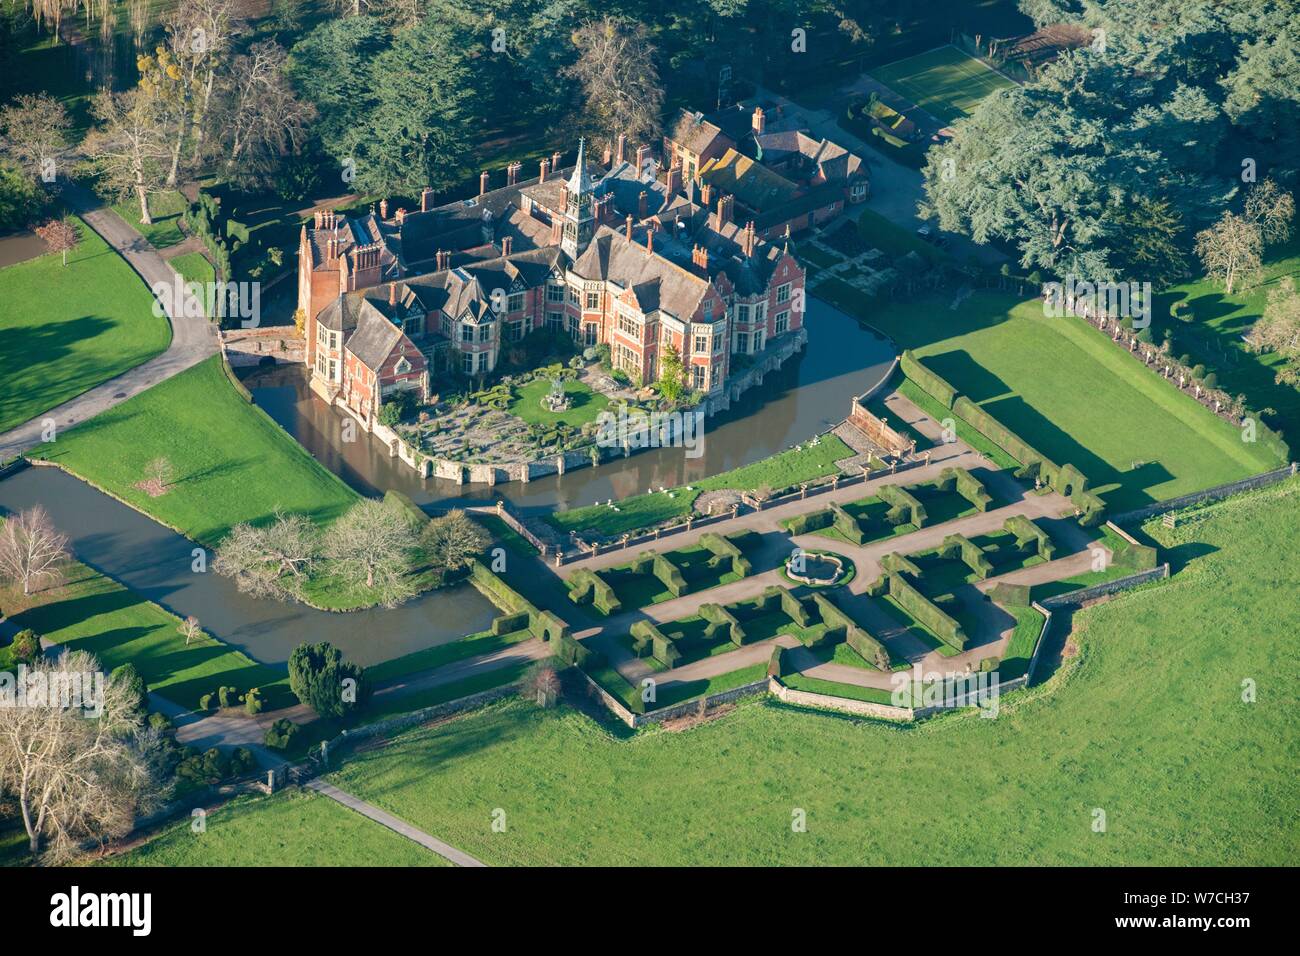 Madresfield Court, moated manor house and formal garden, Madresfield, Worcestershire, 2014. Creator: Historic England Staff Photographer. Stock Photo